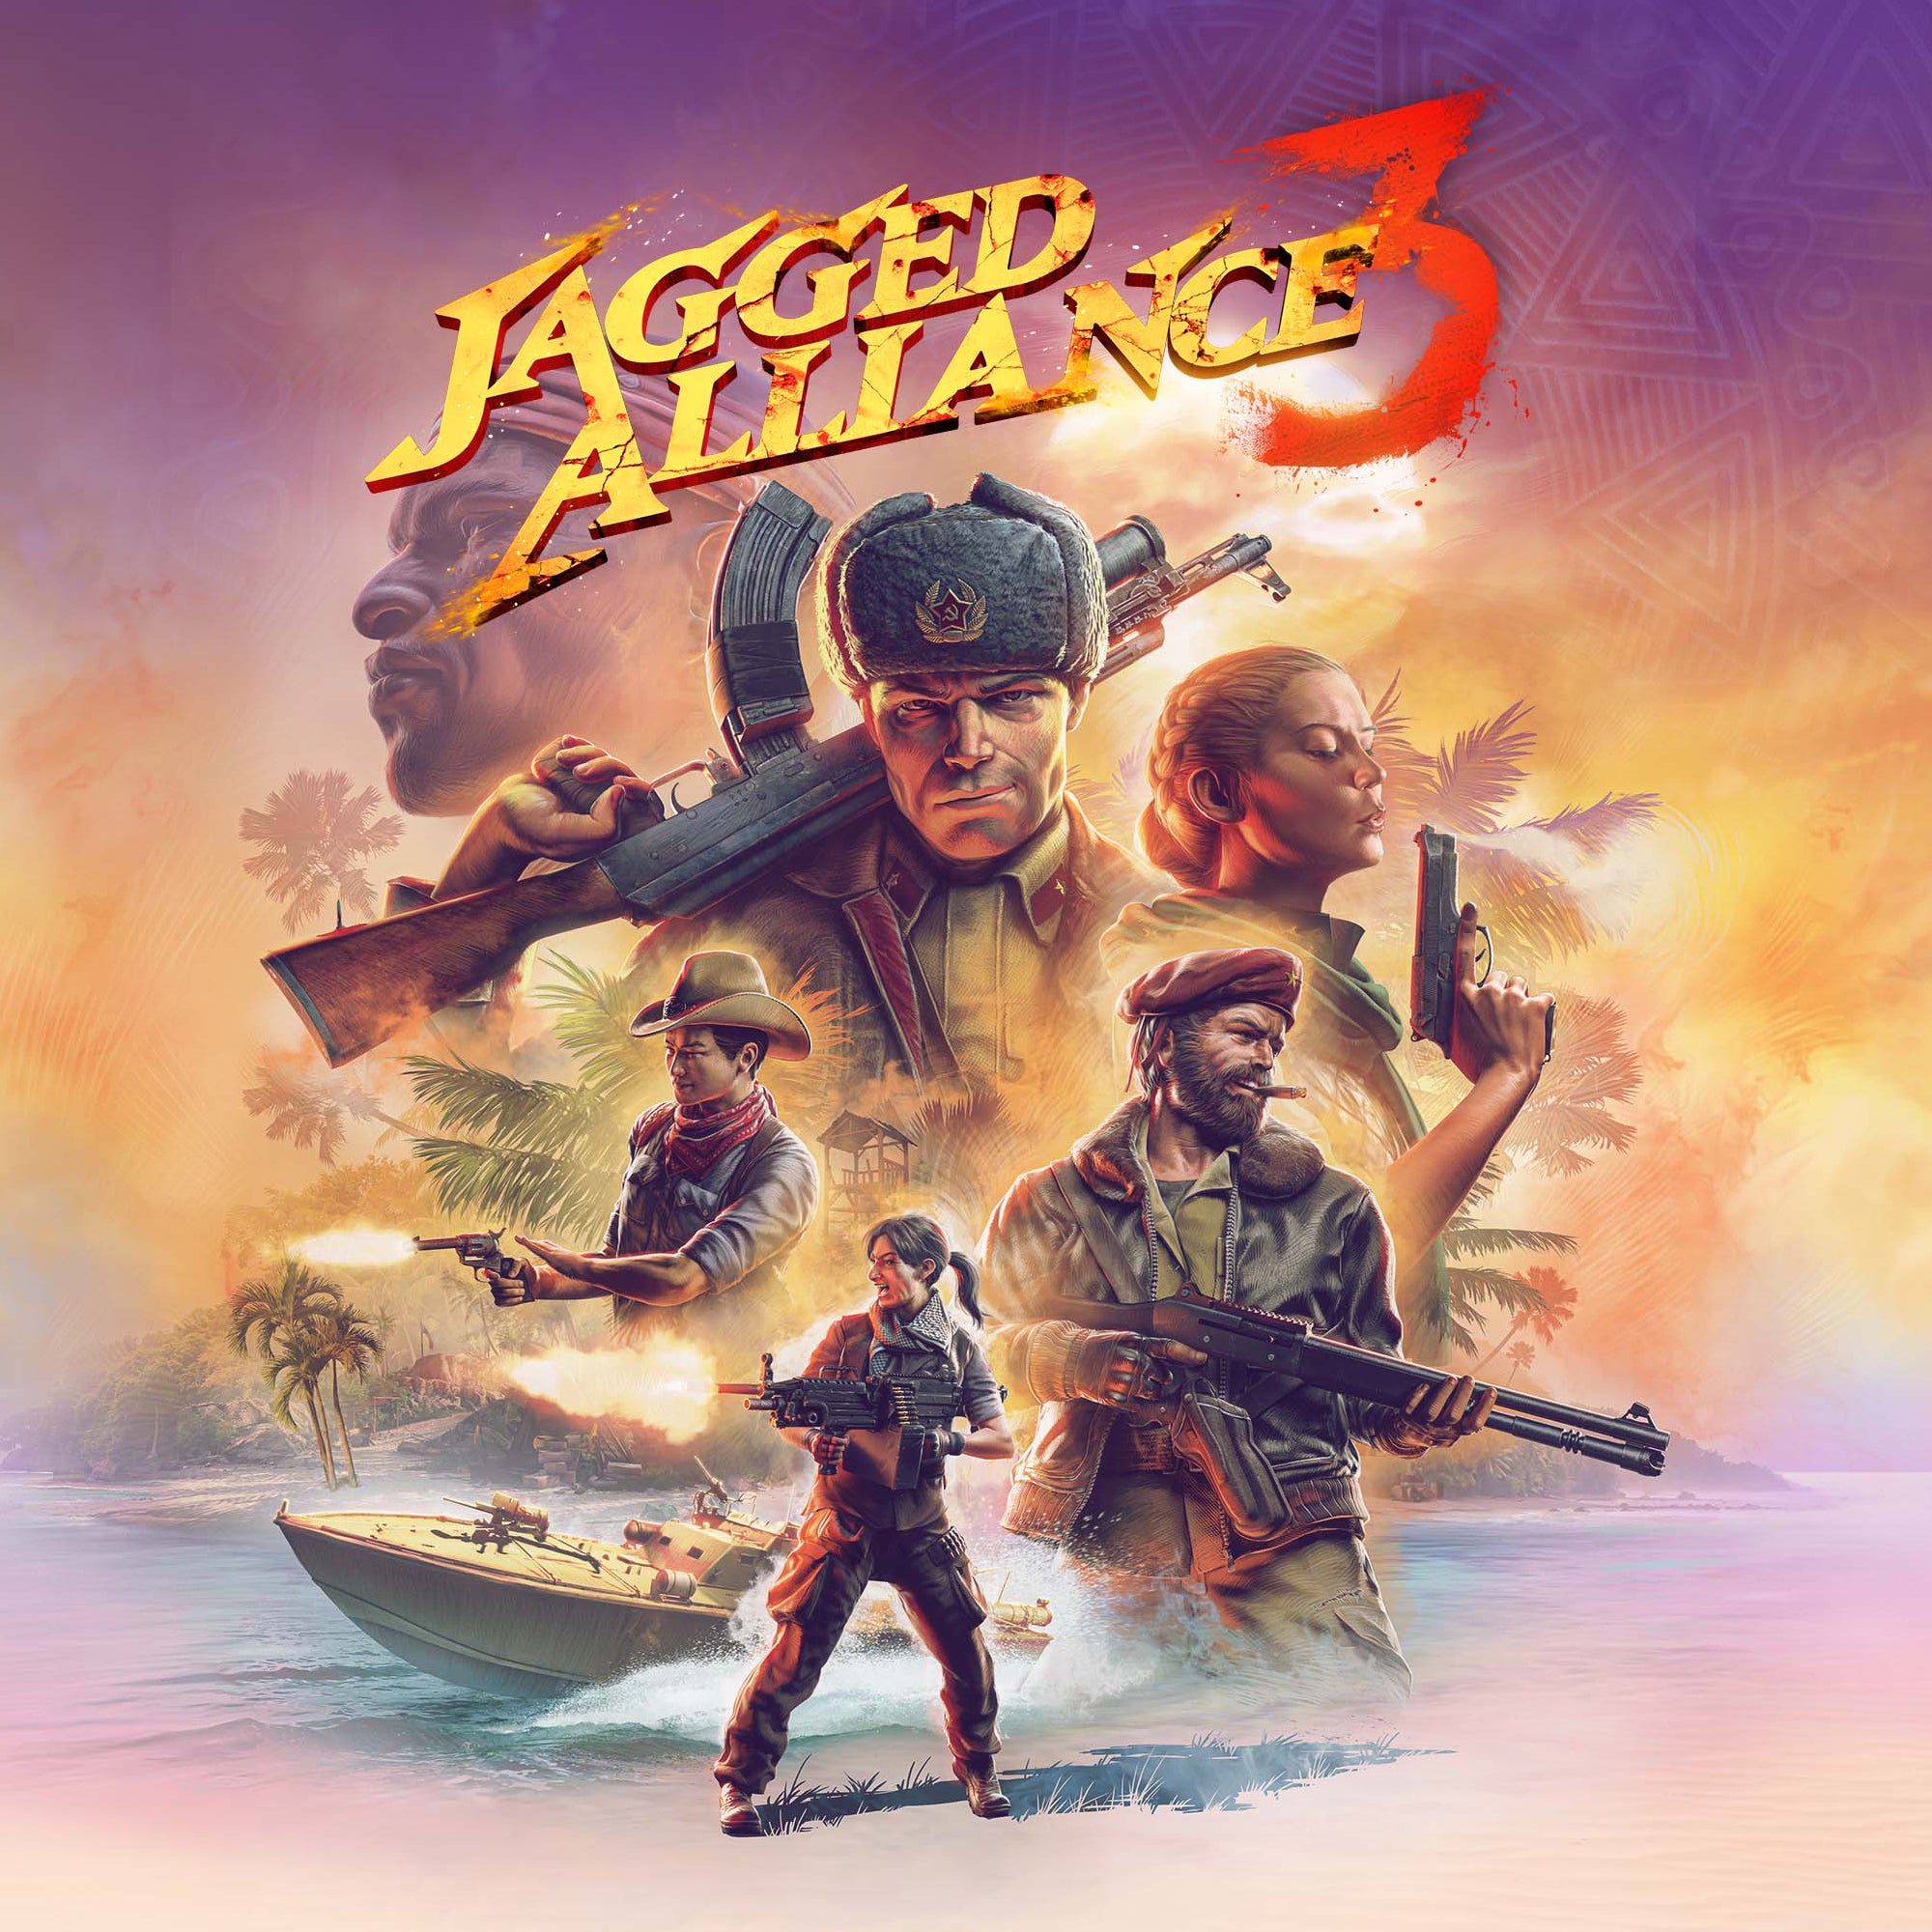 Jagged Alliance 3 Picture